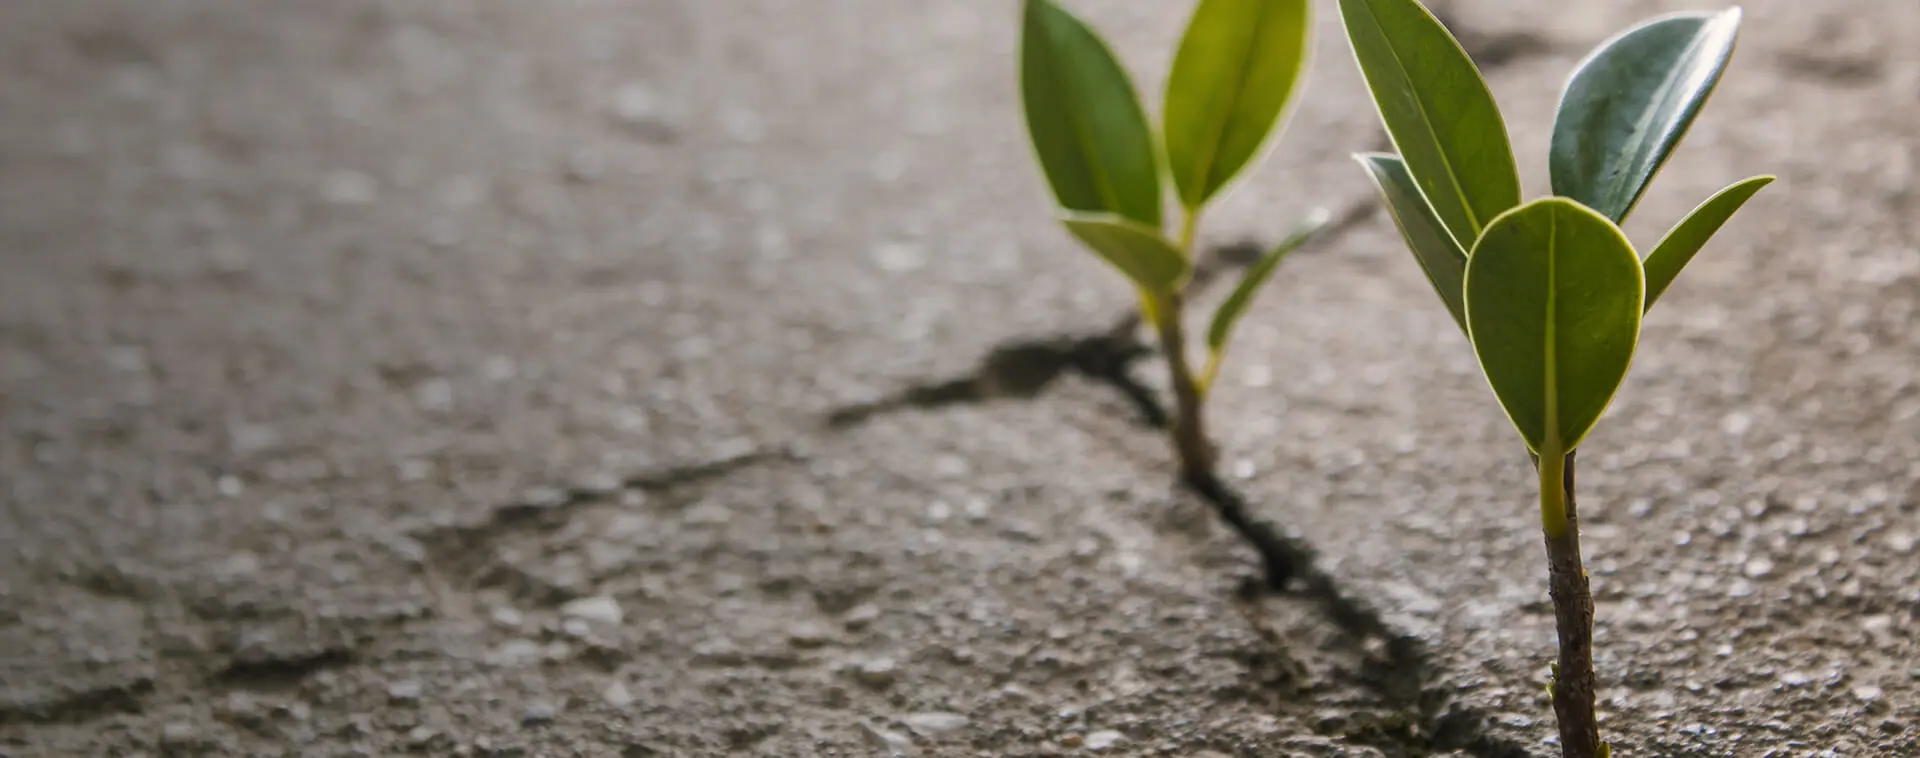 Plants growing from a pavement crack